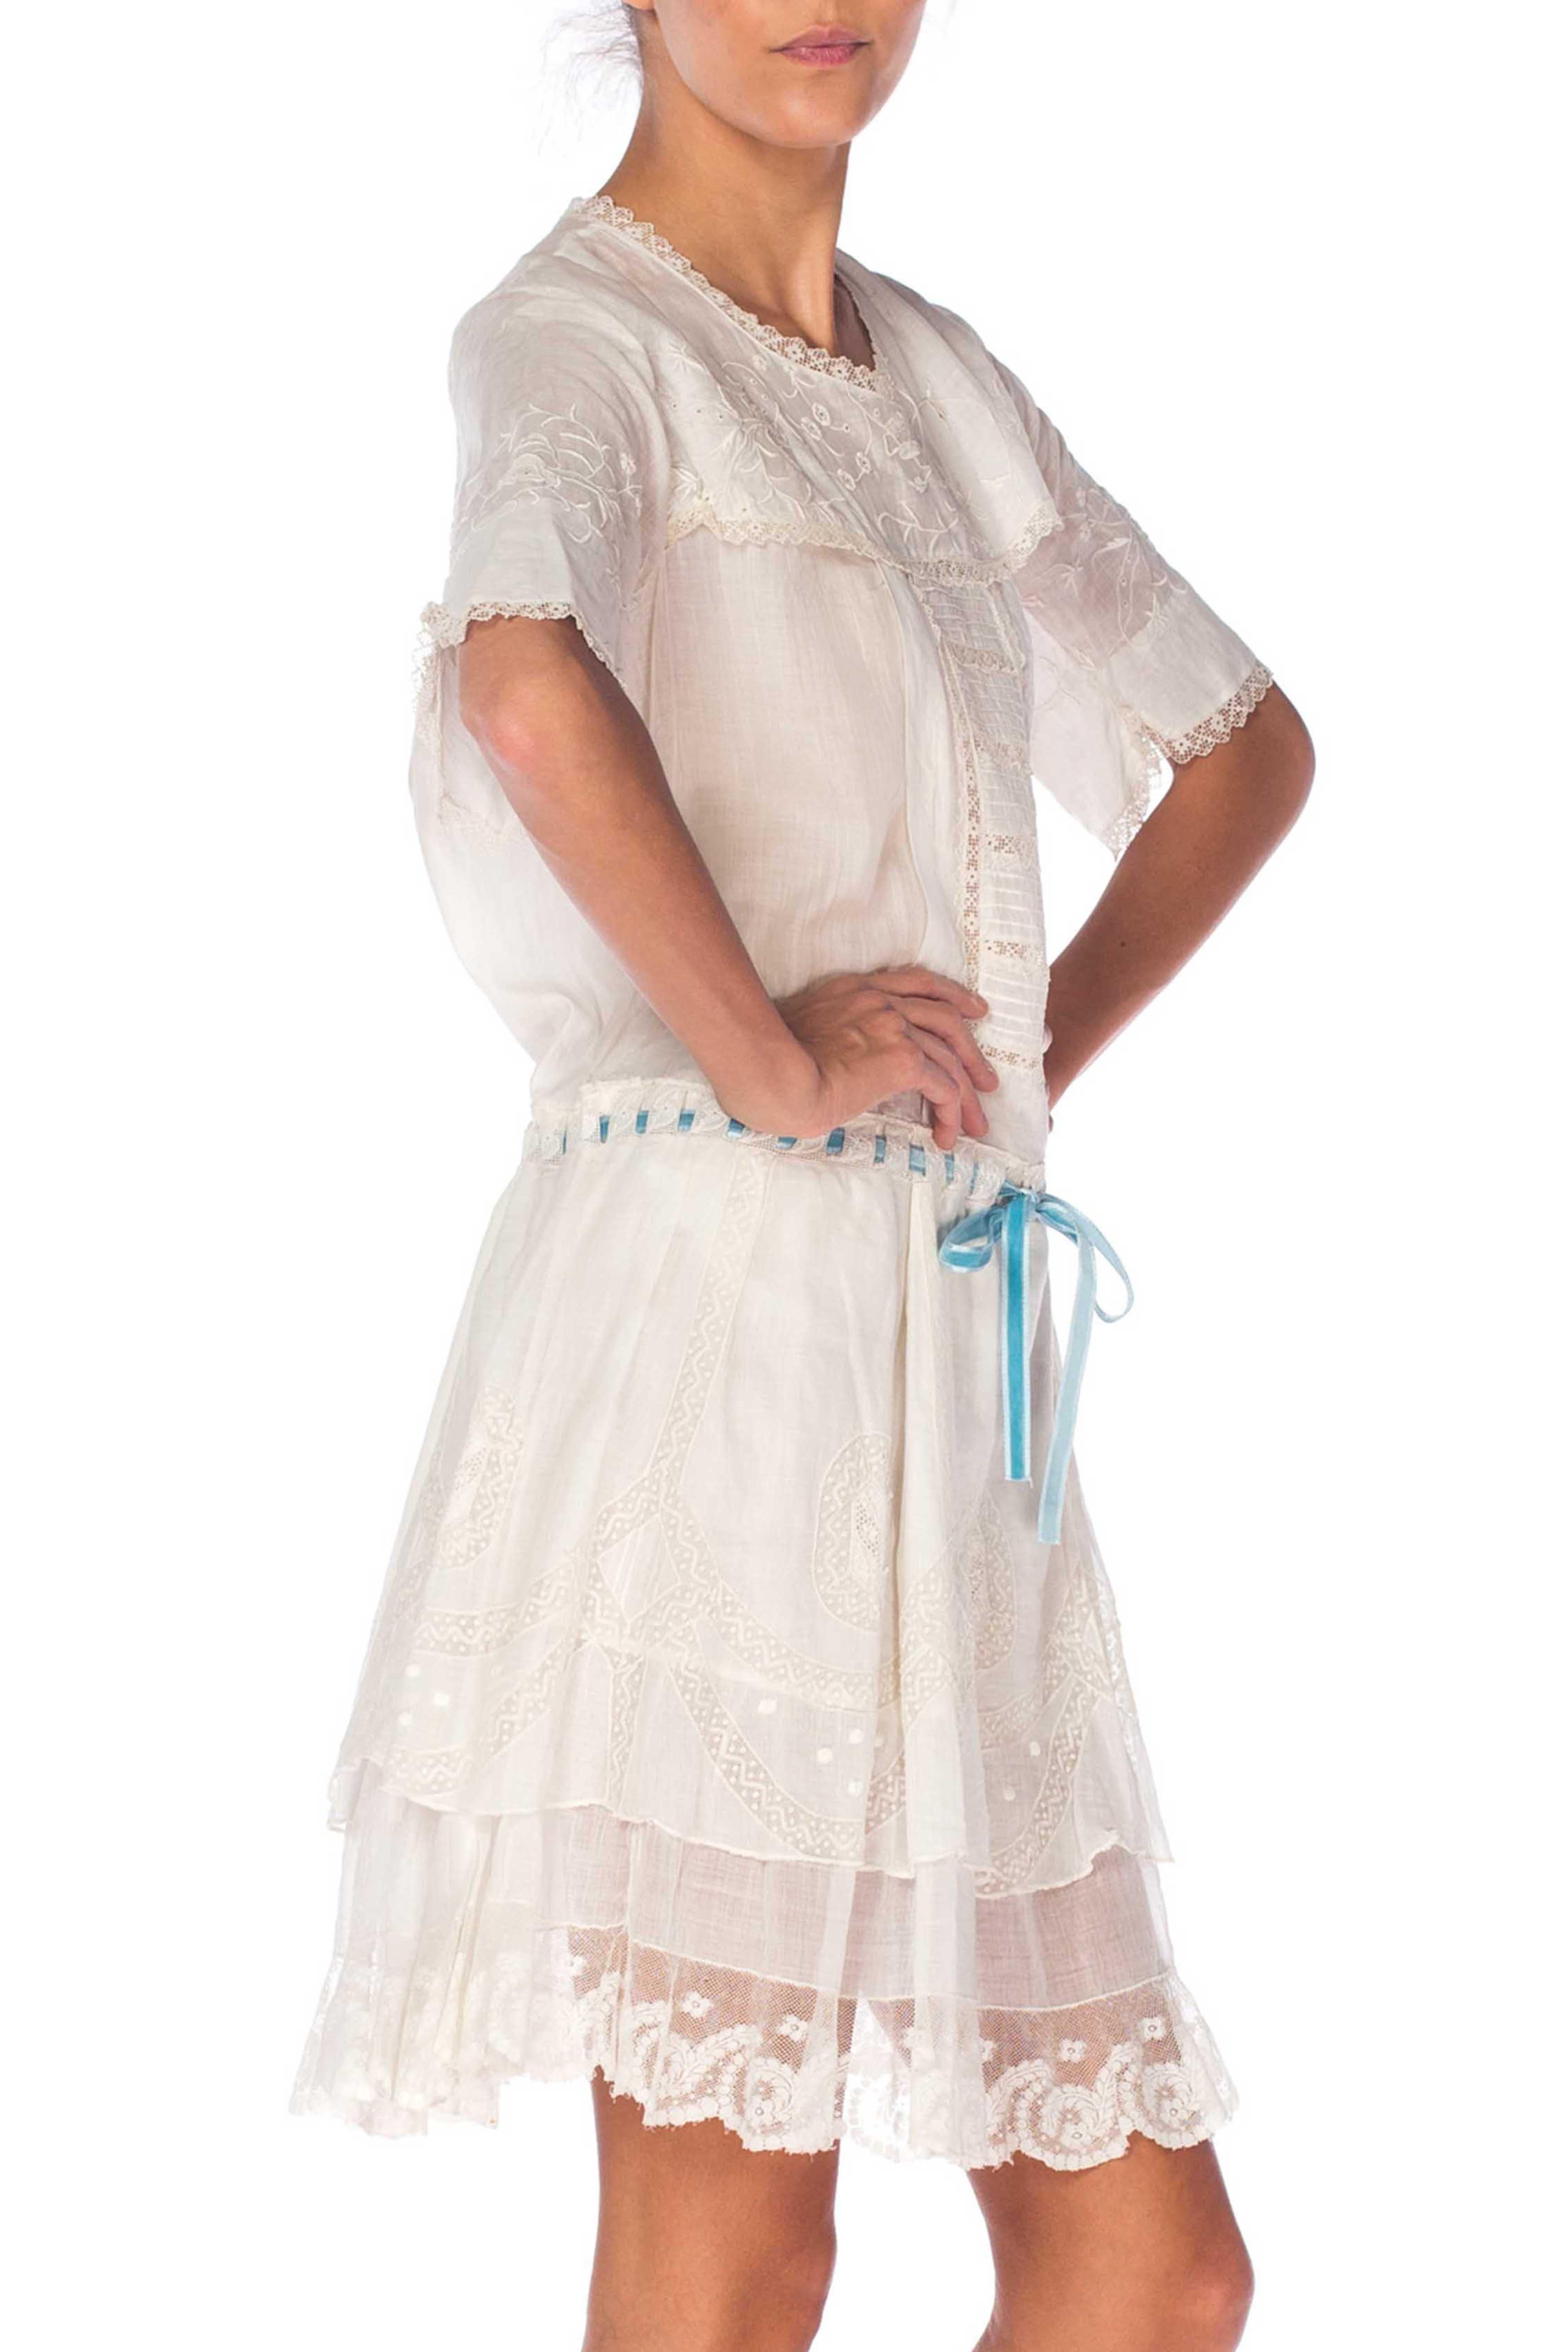 Edwardian White Hand Embroidered Organic Cotton Voile Young Girls Dress With Lace And Ribbon At Waist